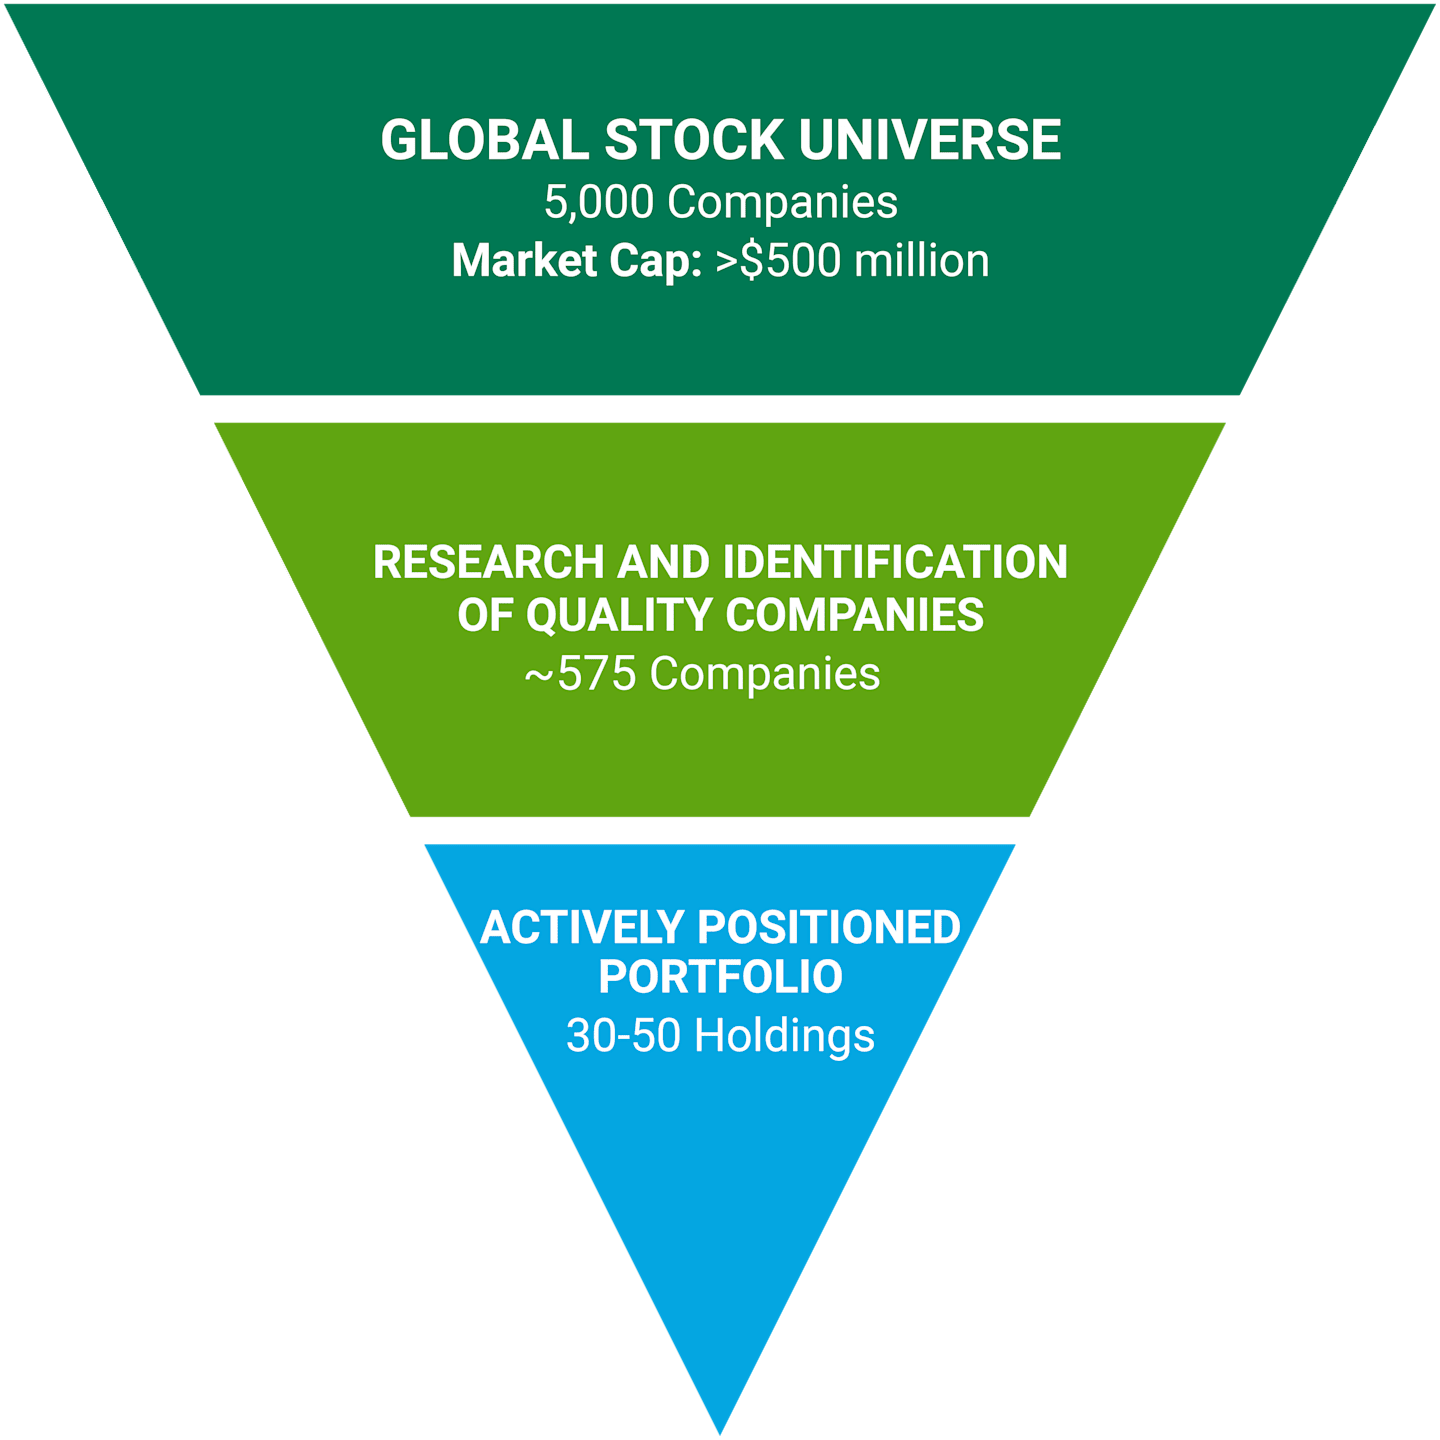 Global Stock Universe: 5,000 companies, market cap: >$500M. Research and Identification of Quality Companies: ~575 companies. Actively Positioned Portfolio: 30-50 holdings.